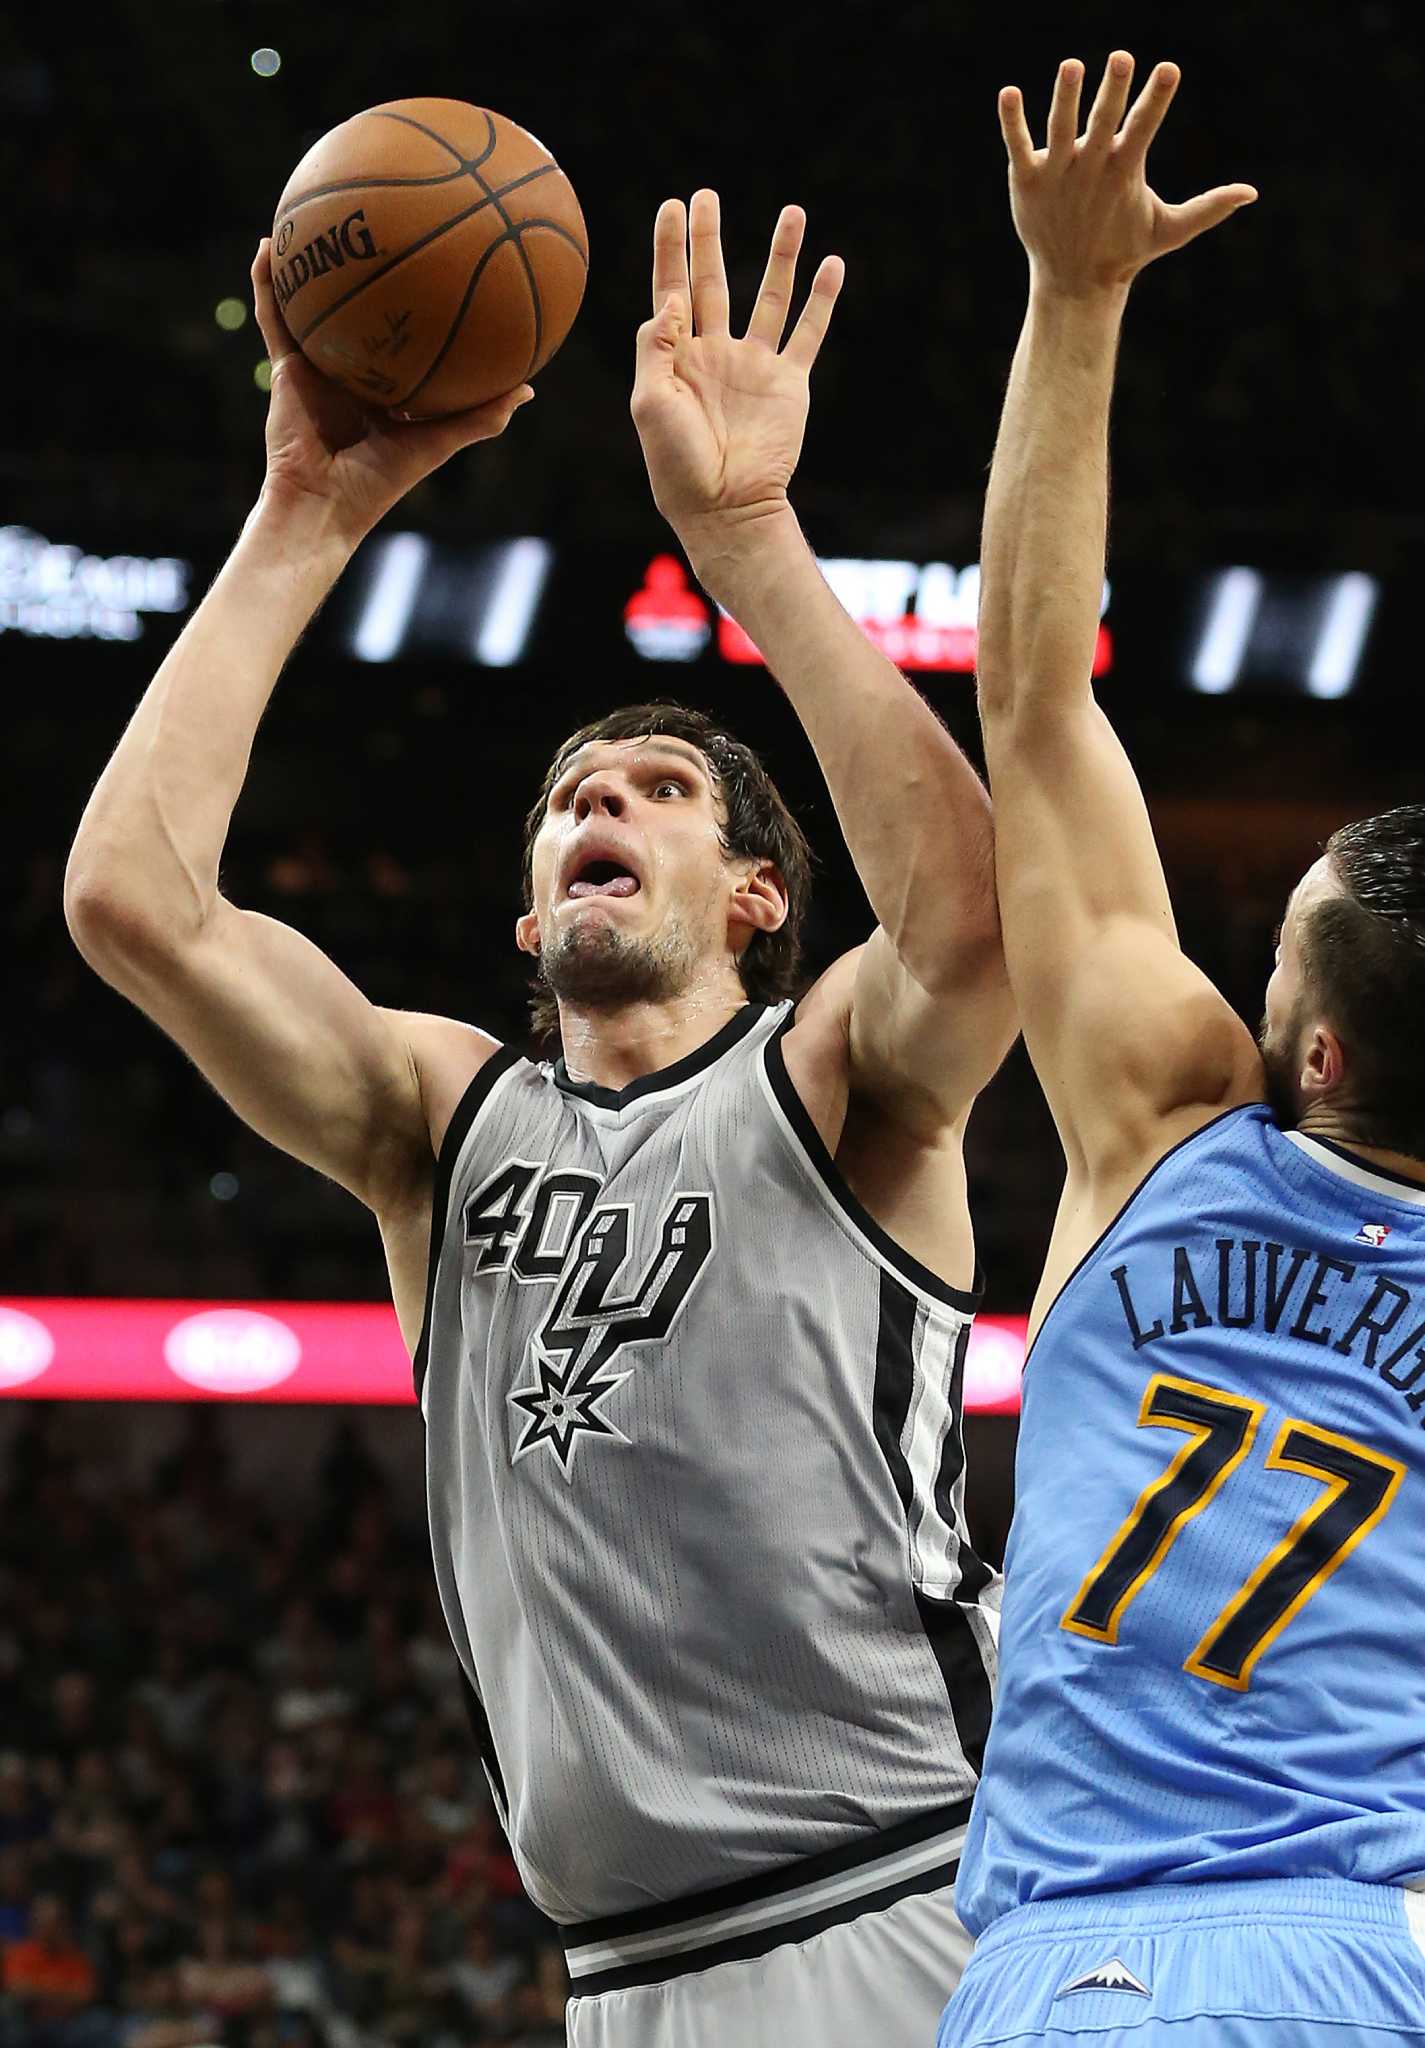 Alley-Oop Drunk - - Boban Marjanovic's HAND, though. 😳